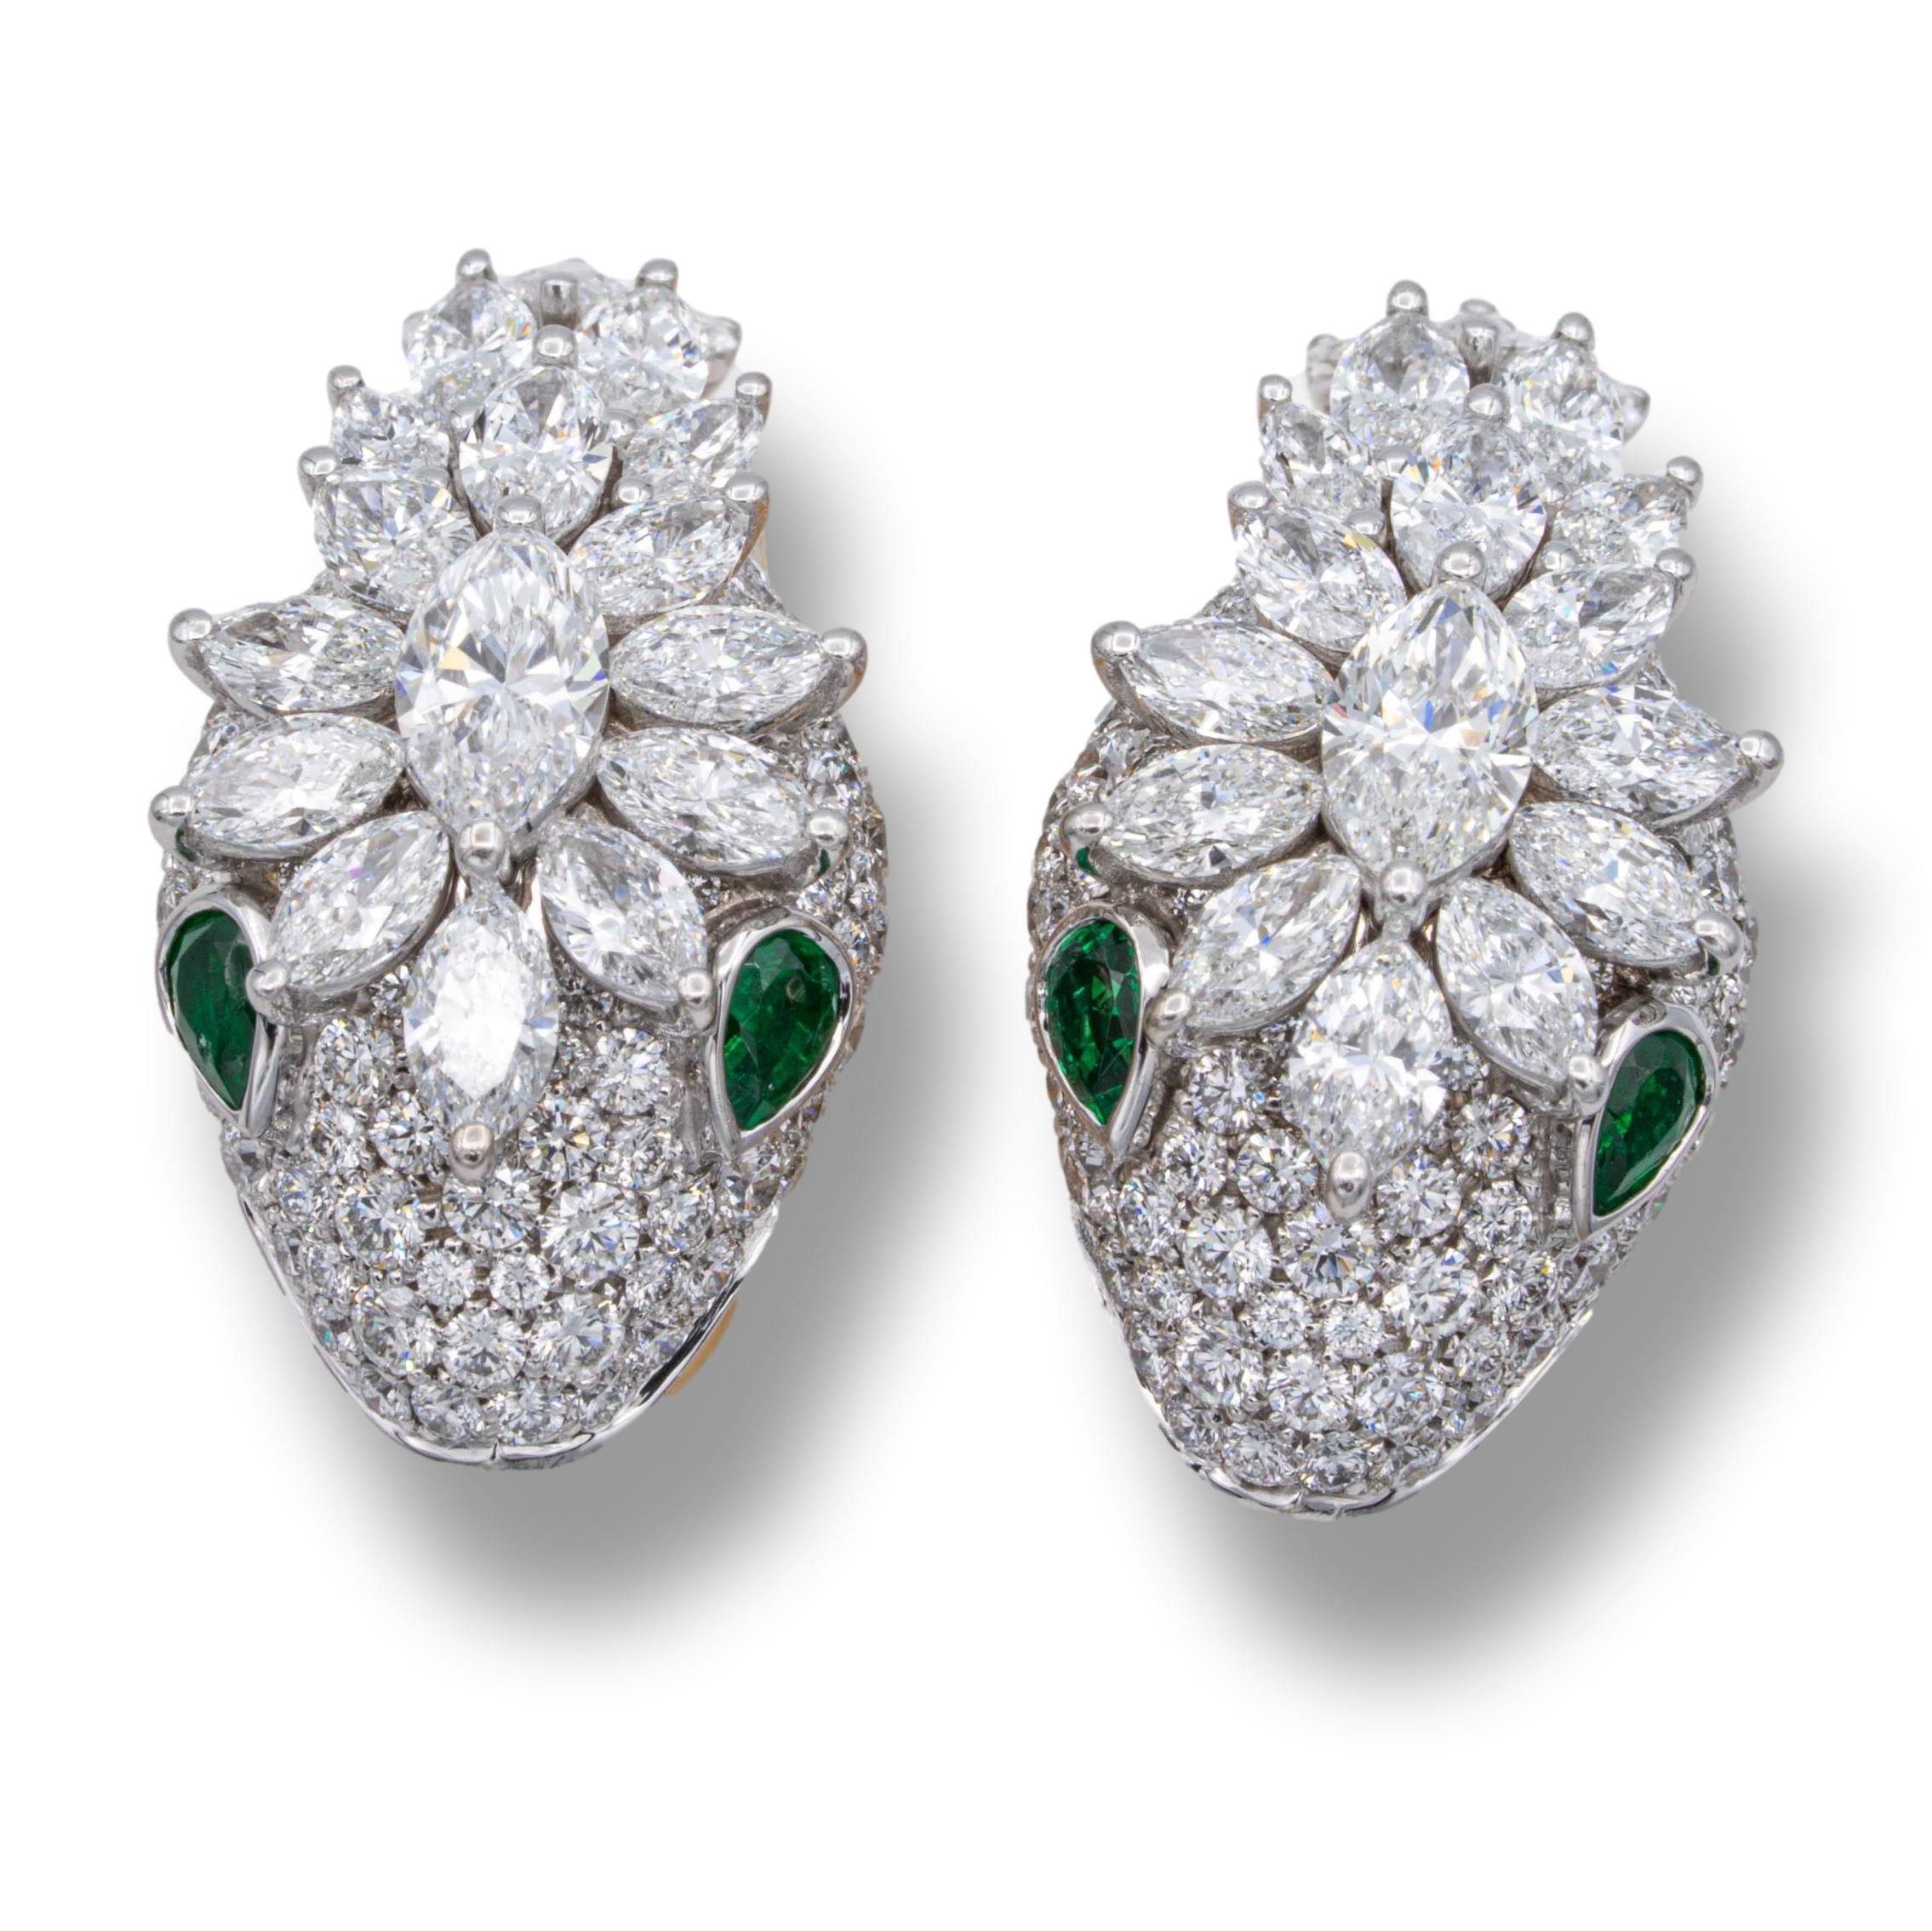 Marquise Cut Bvlgari Serpenti Platinum and 18K Yellow Gold Diamond Earrings with Emerald Eyes